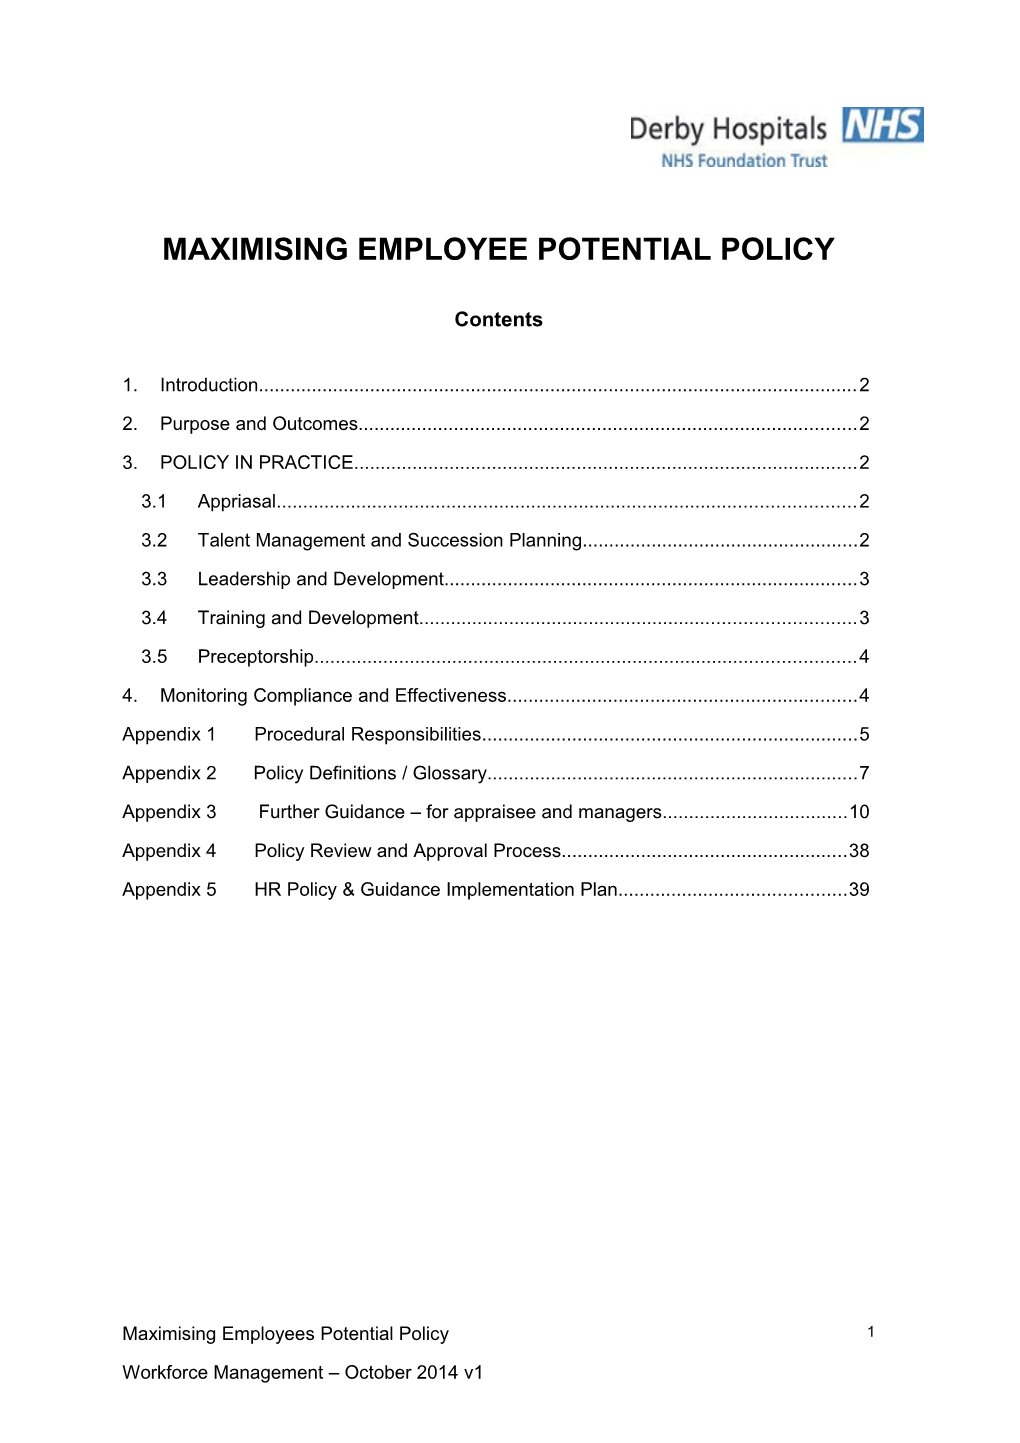 Maximising Employee Potential Policy